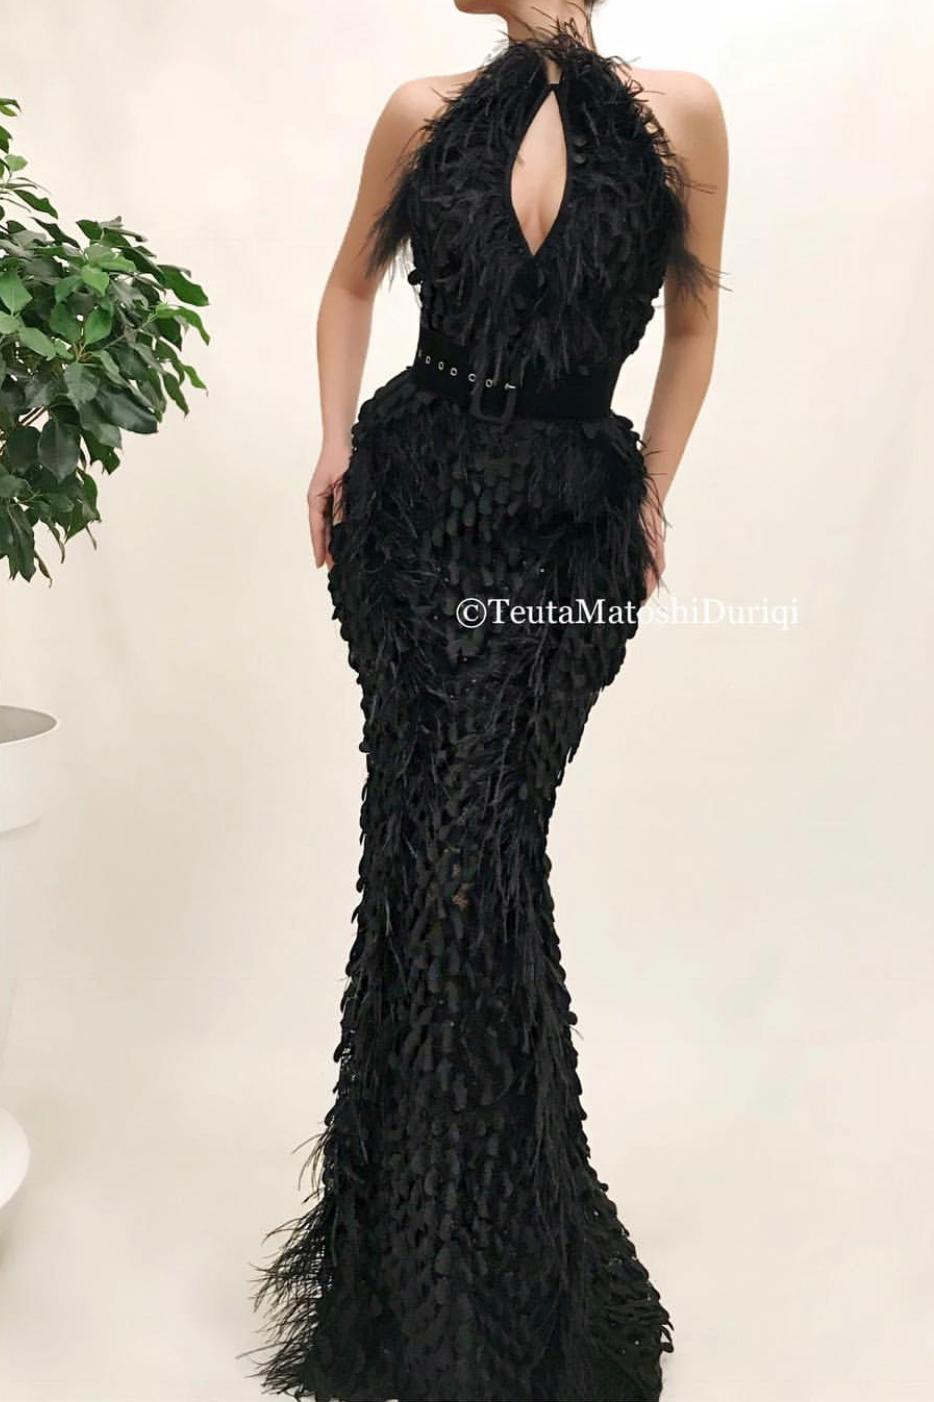 Black mermaid dress with belt, feathers and no sleeves